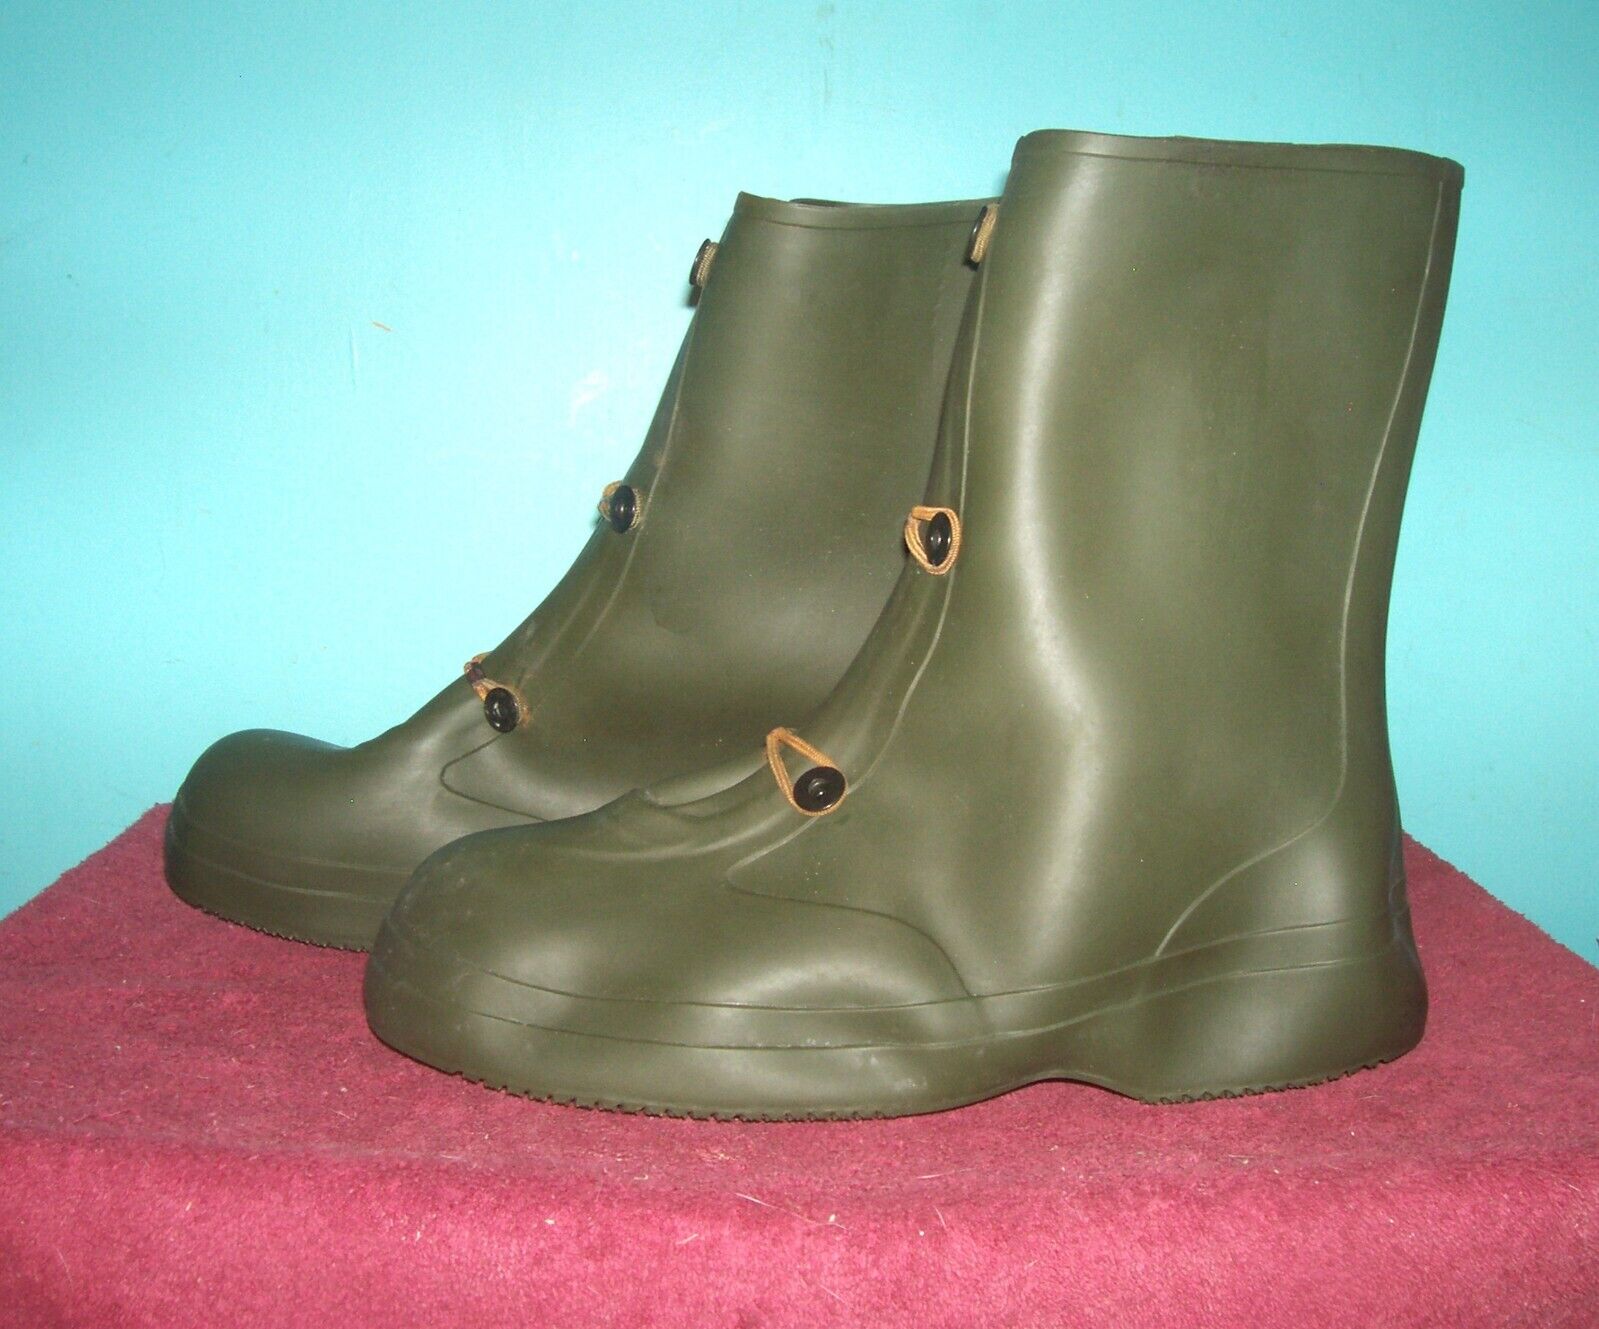 MILITARY KCA WATERPROOF GREEN RUBBER BOOTS SZ. 13 UNISSUED  OVERSHOES